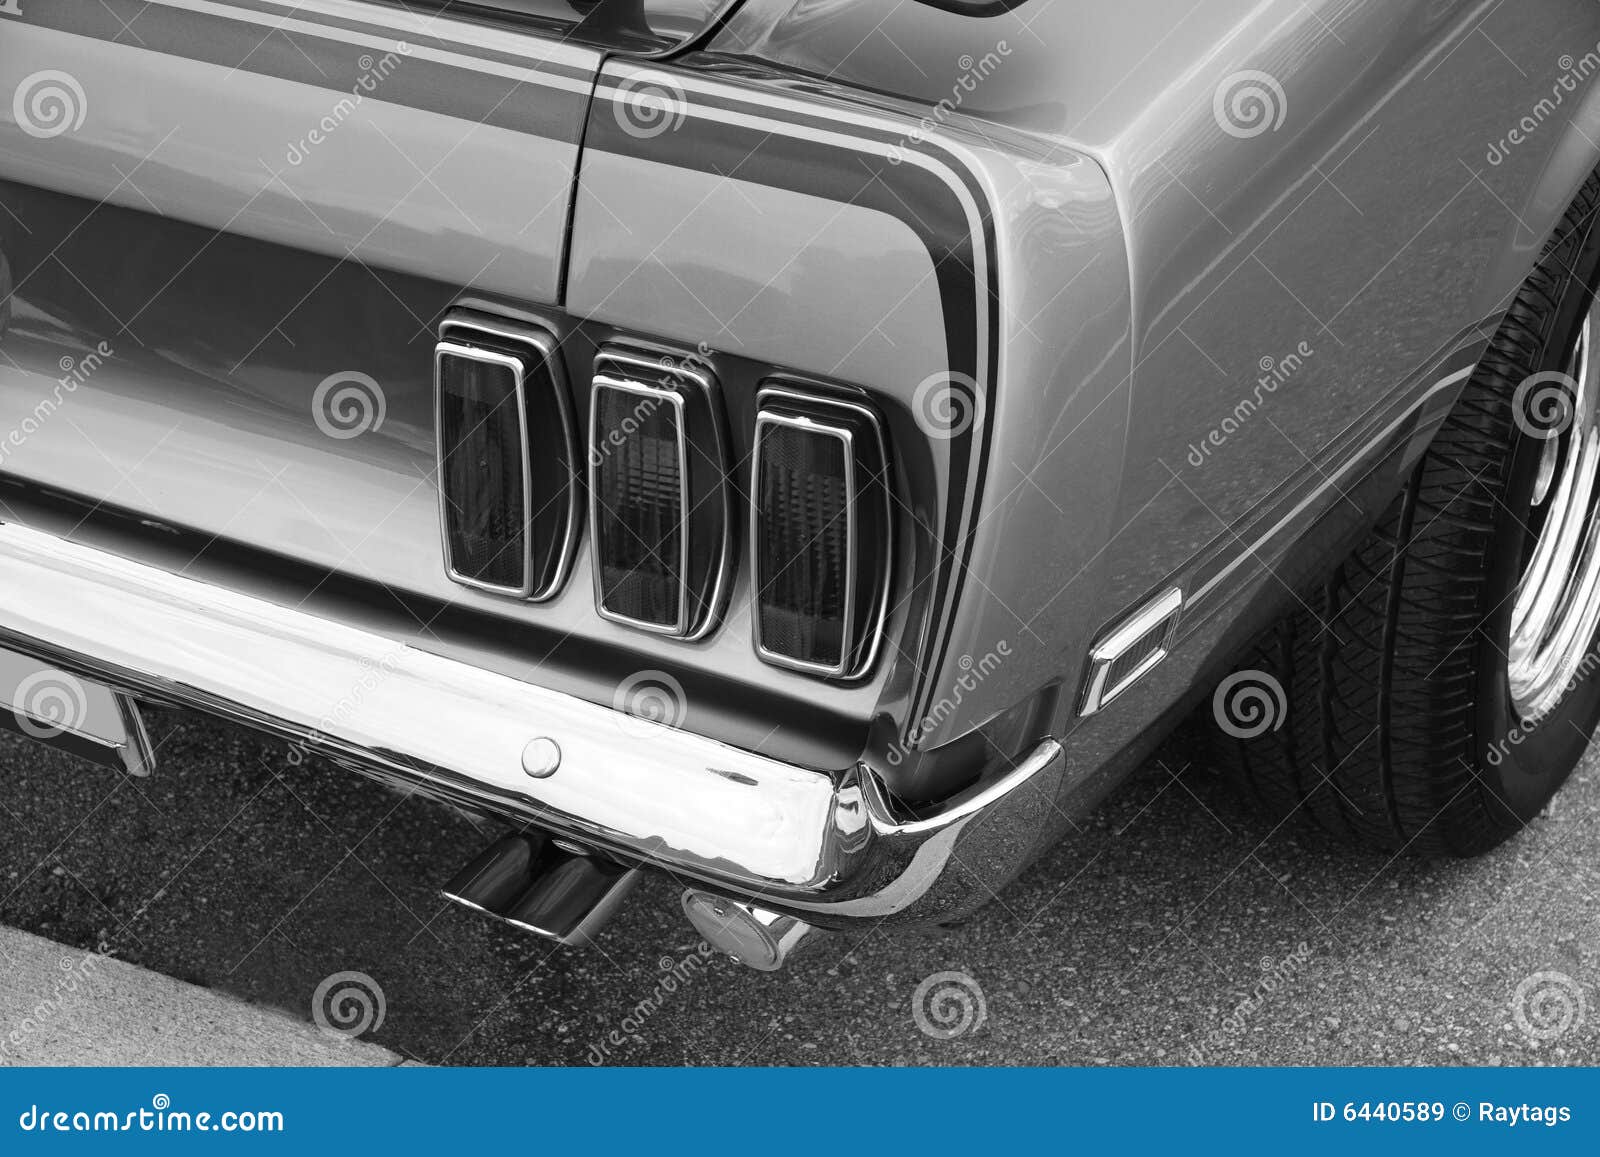 mustang rear end